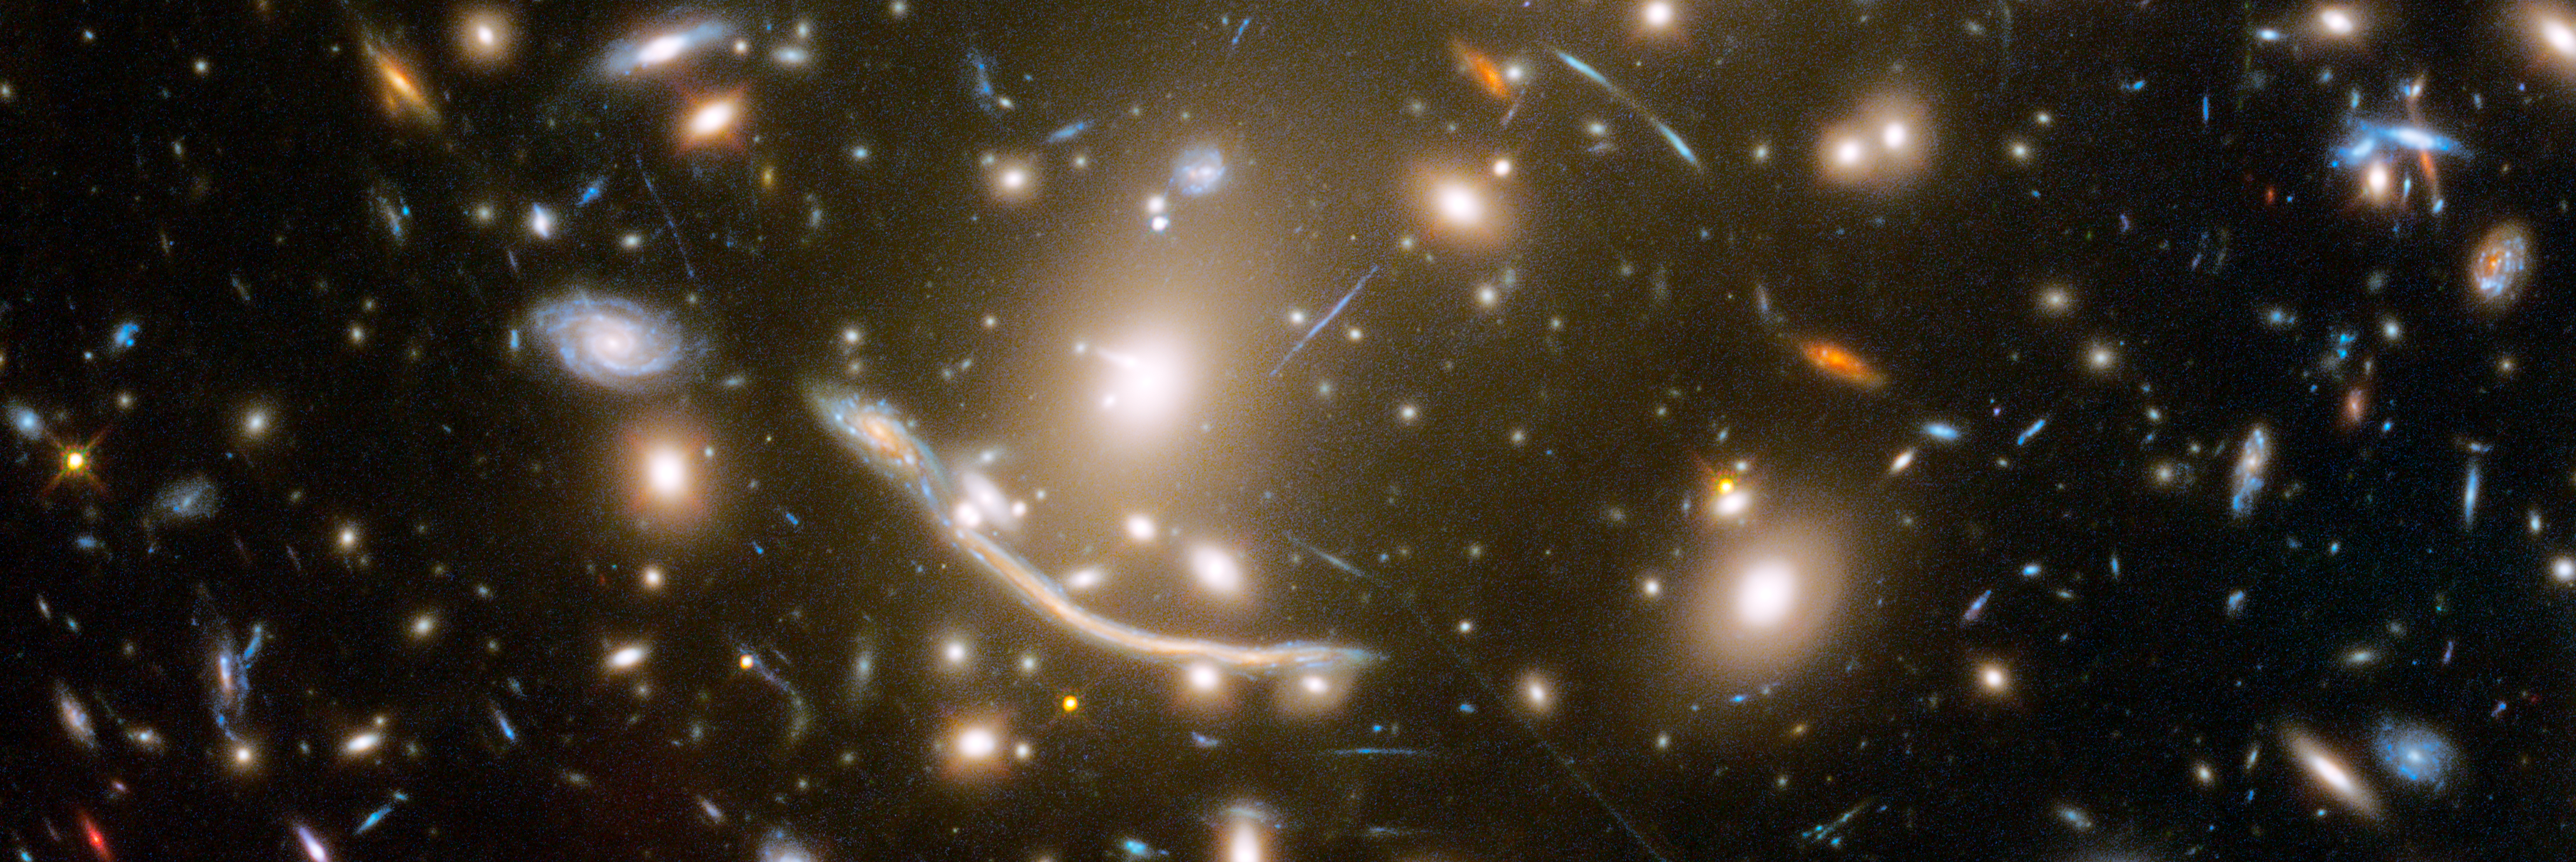 Hubble Space Telescope image of galaxy cluster Abell 370